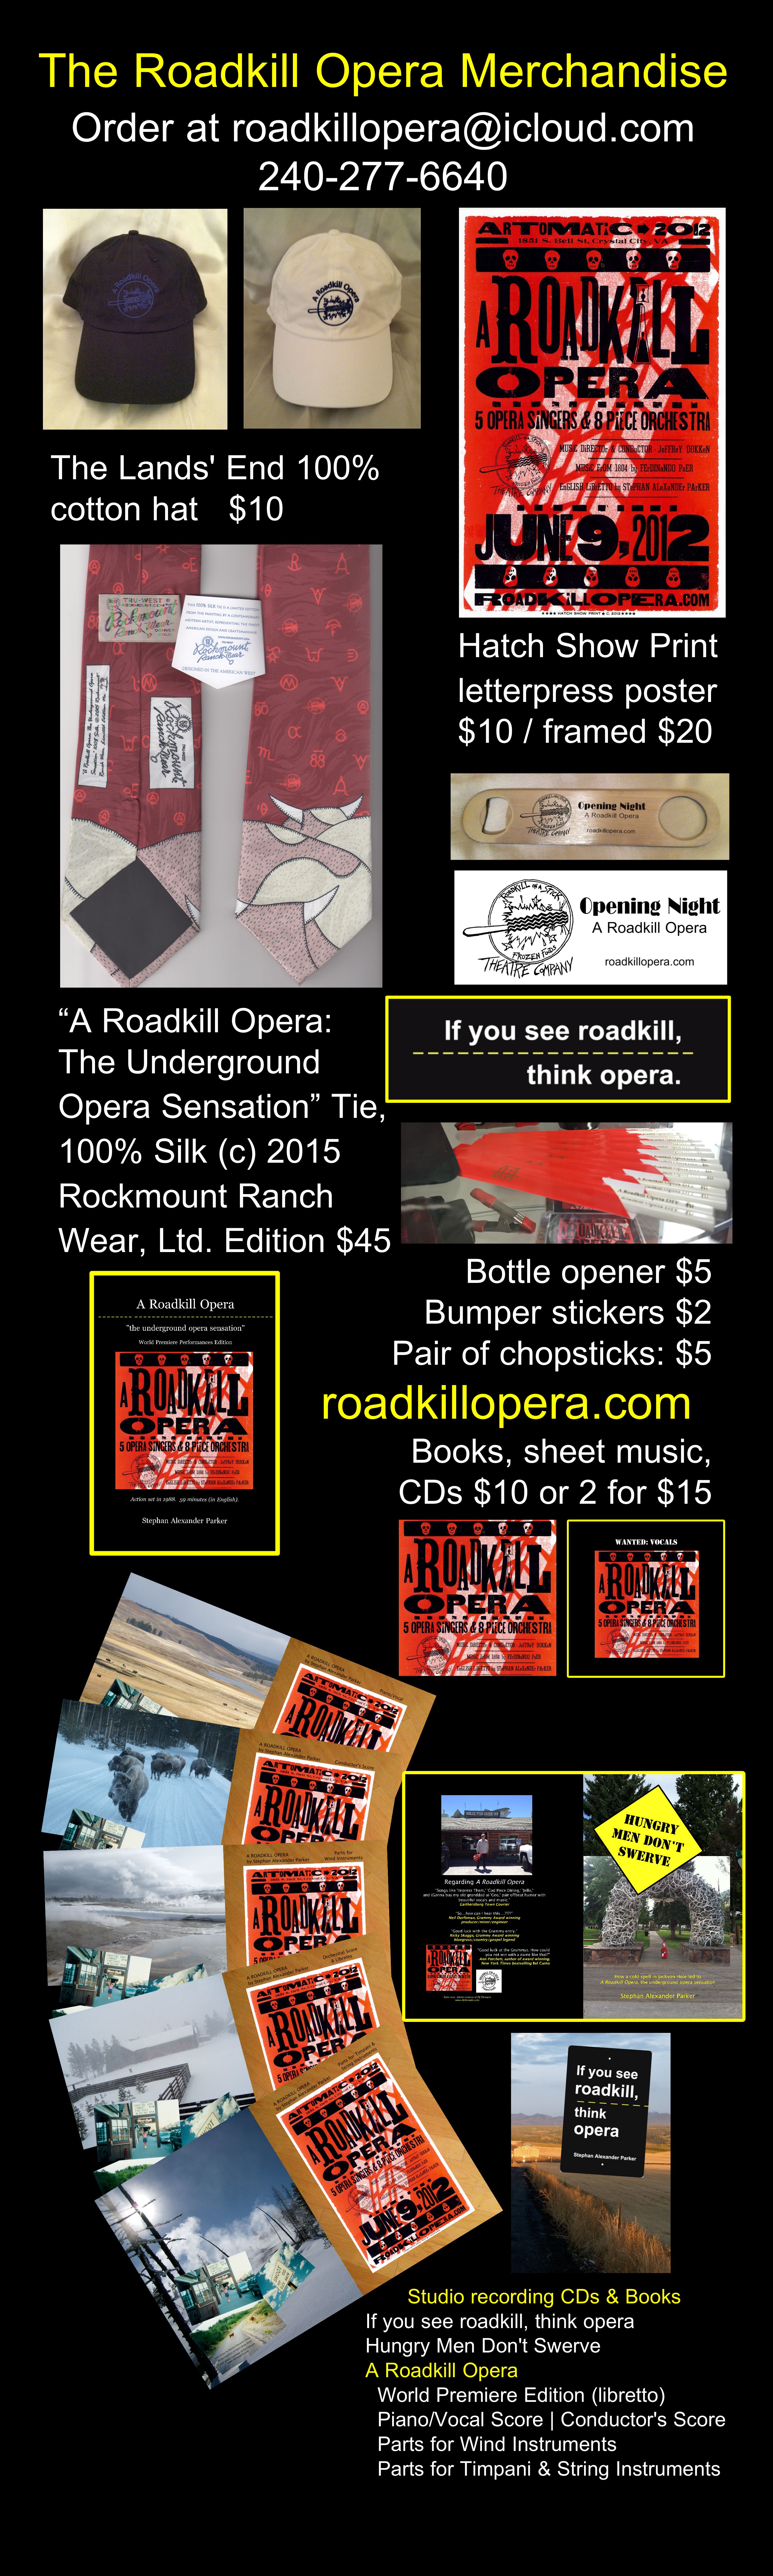 The Roadkill Opera Merchandise banner display showing all manner of mercy for sale, from hats and bottle openers and bumper stickers, to sheet music and CDs, to neckties and books